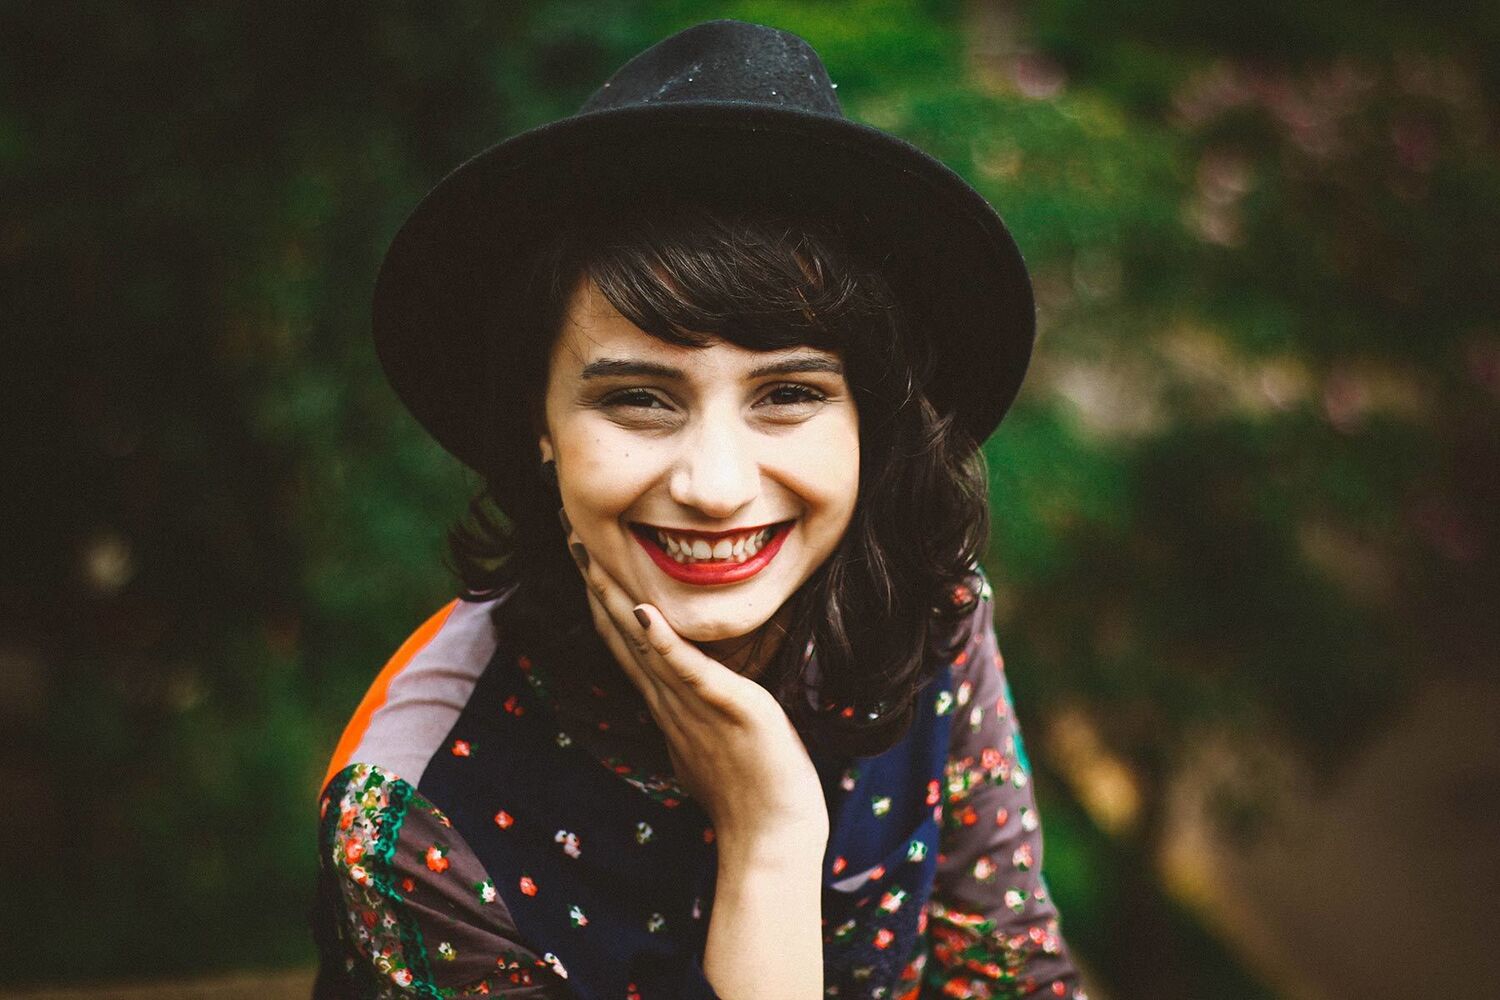 Young Woman With Red Lipstick Wearing Black Felt Hat Smiling At Camera With Greenery Behind Her